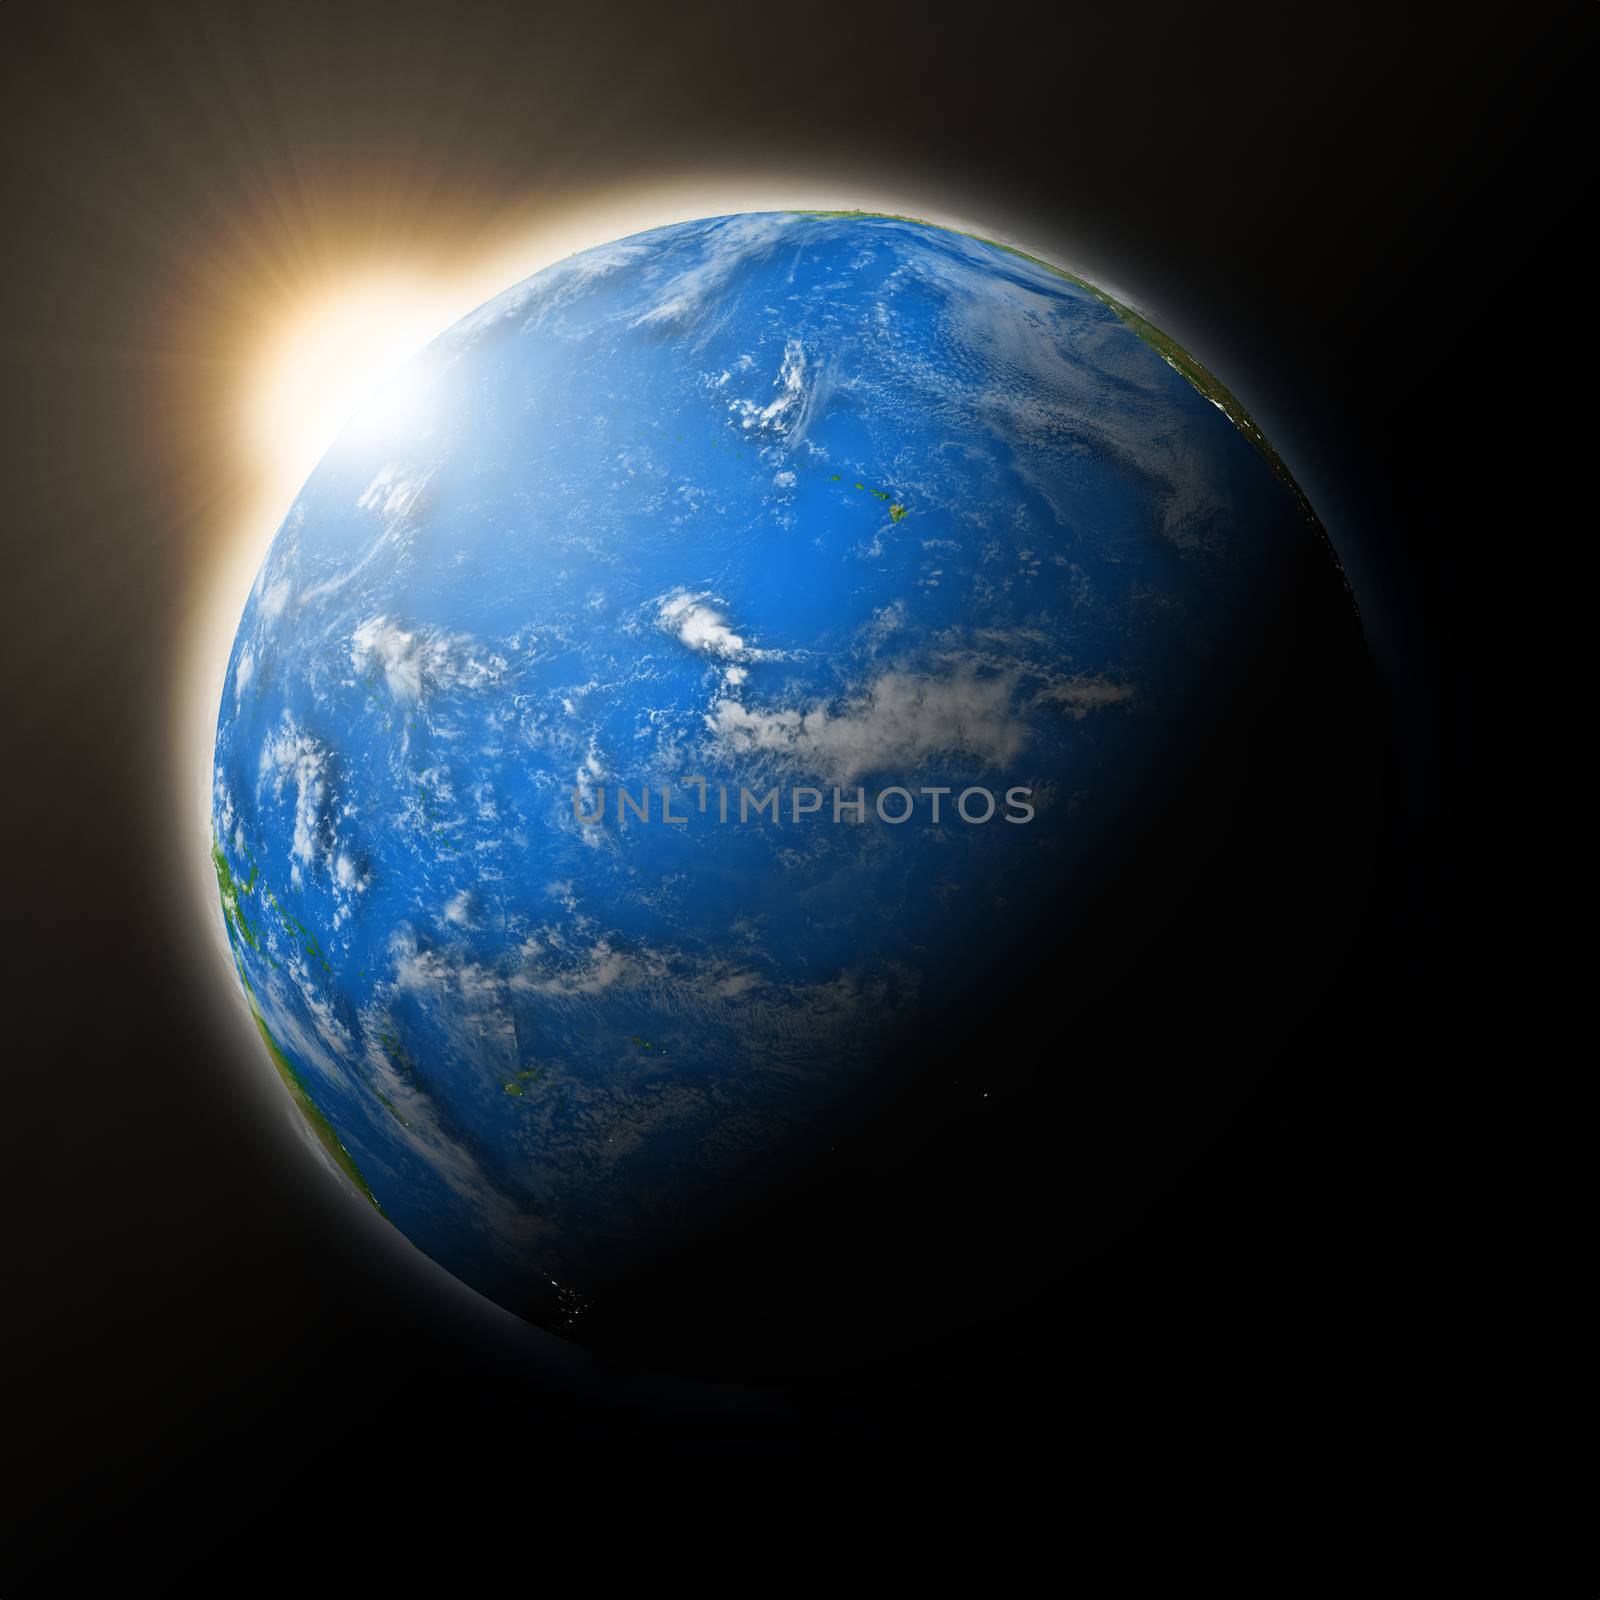 Sun over Pacific Ocean on planet Earth by Harvepino